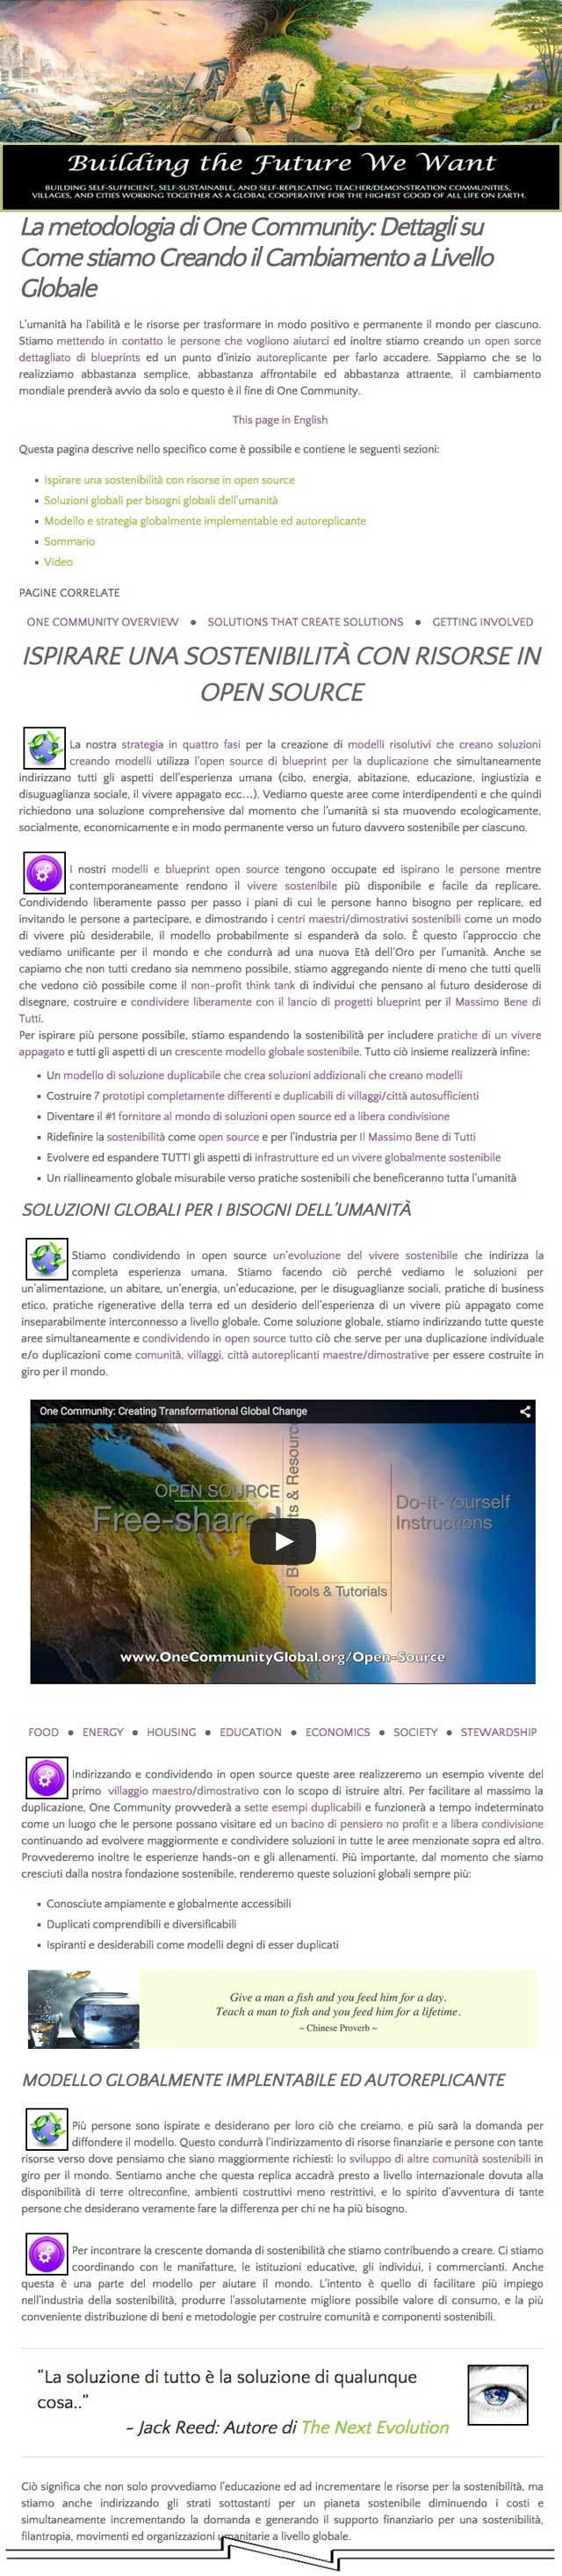 Global Game-Changing Solutions, Methodology page into Italian, One Community